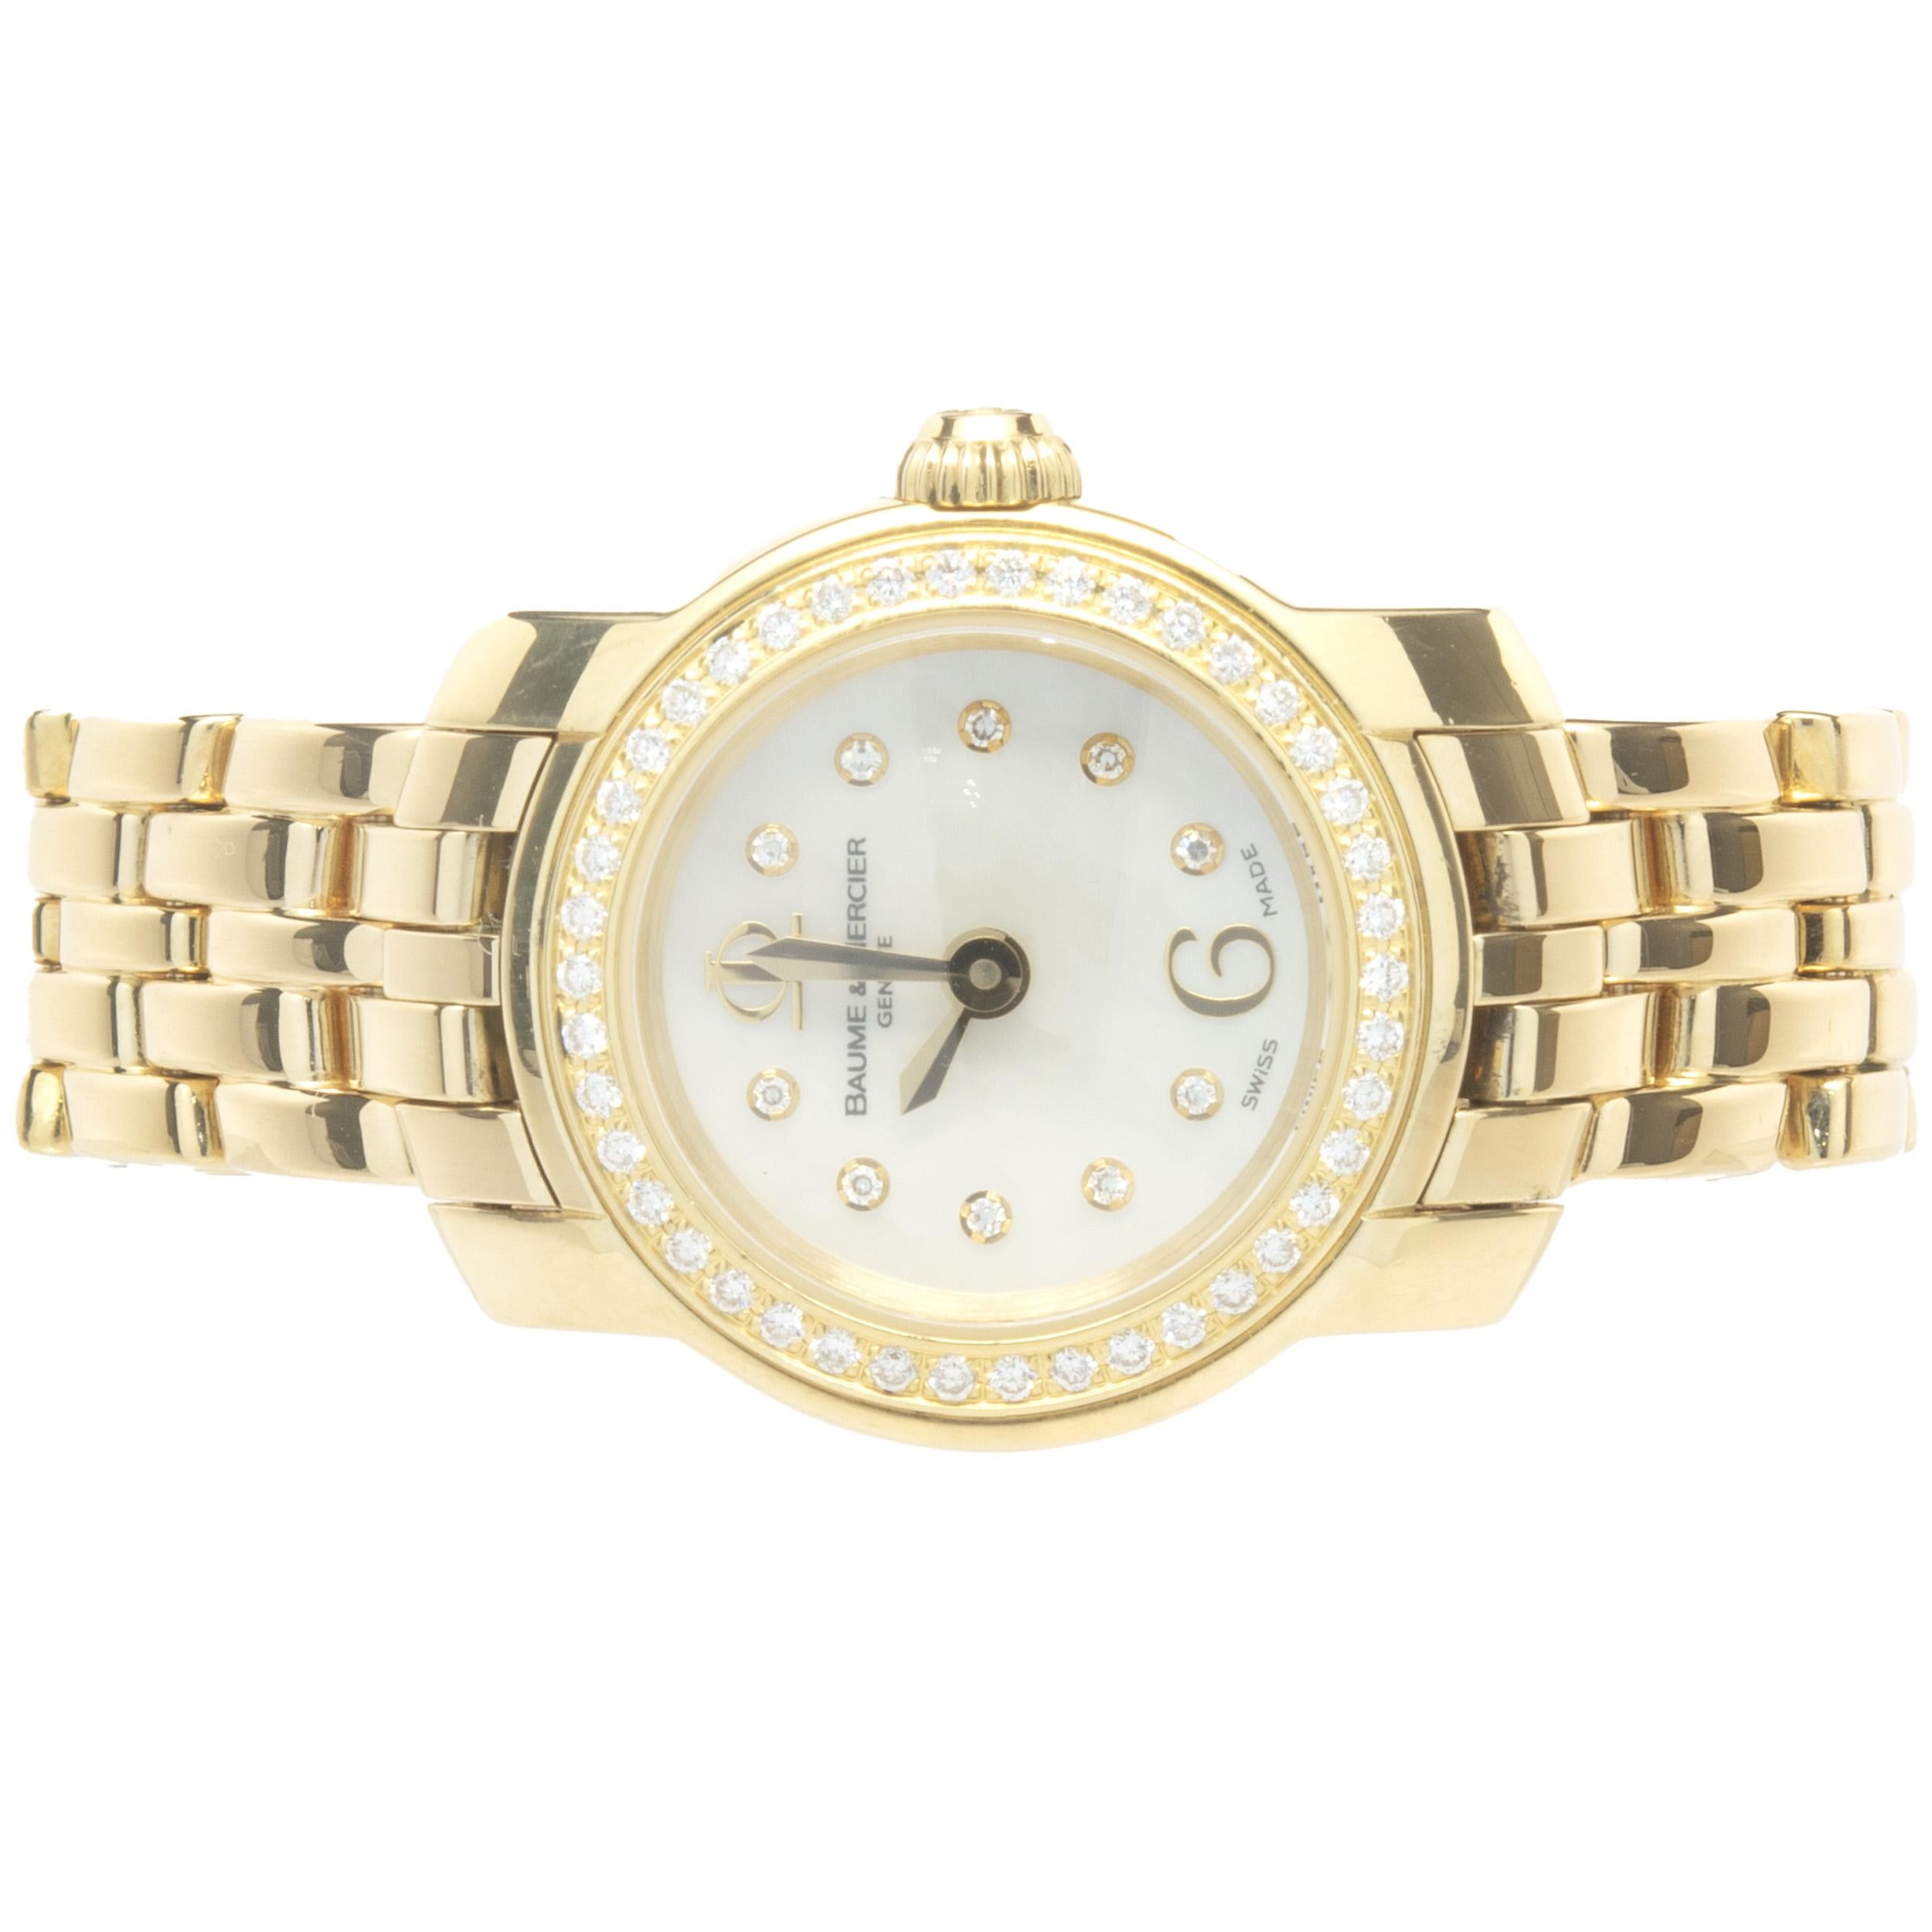 Movement: quartz
Function: hours, minutes
Case: 22mm round case, diamond bezel, push/pull crown
Band: 18K yellow gold bracelet, integrated clasp
Dial: diamond mother of pearl

Complete with original box and papers
Guaranteed to be authentic by